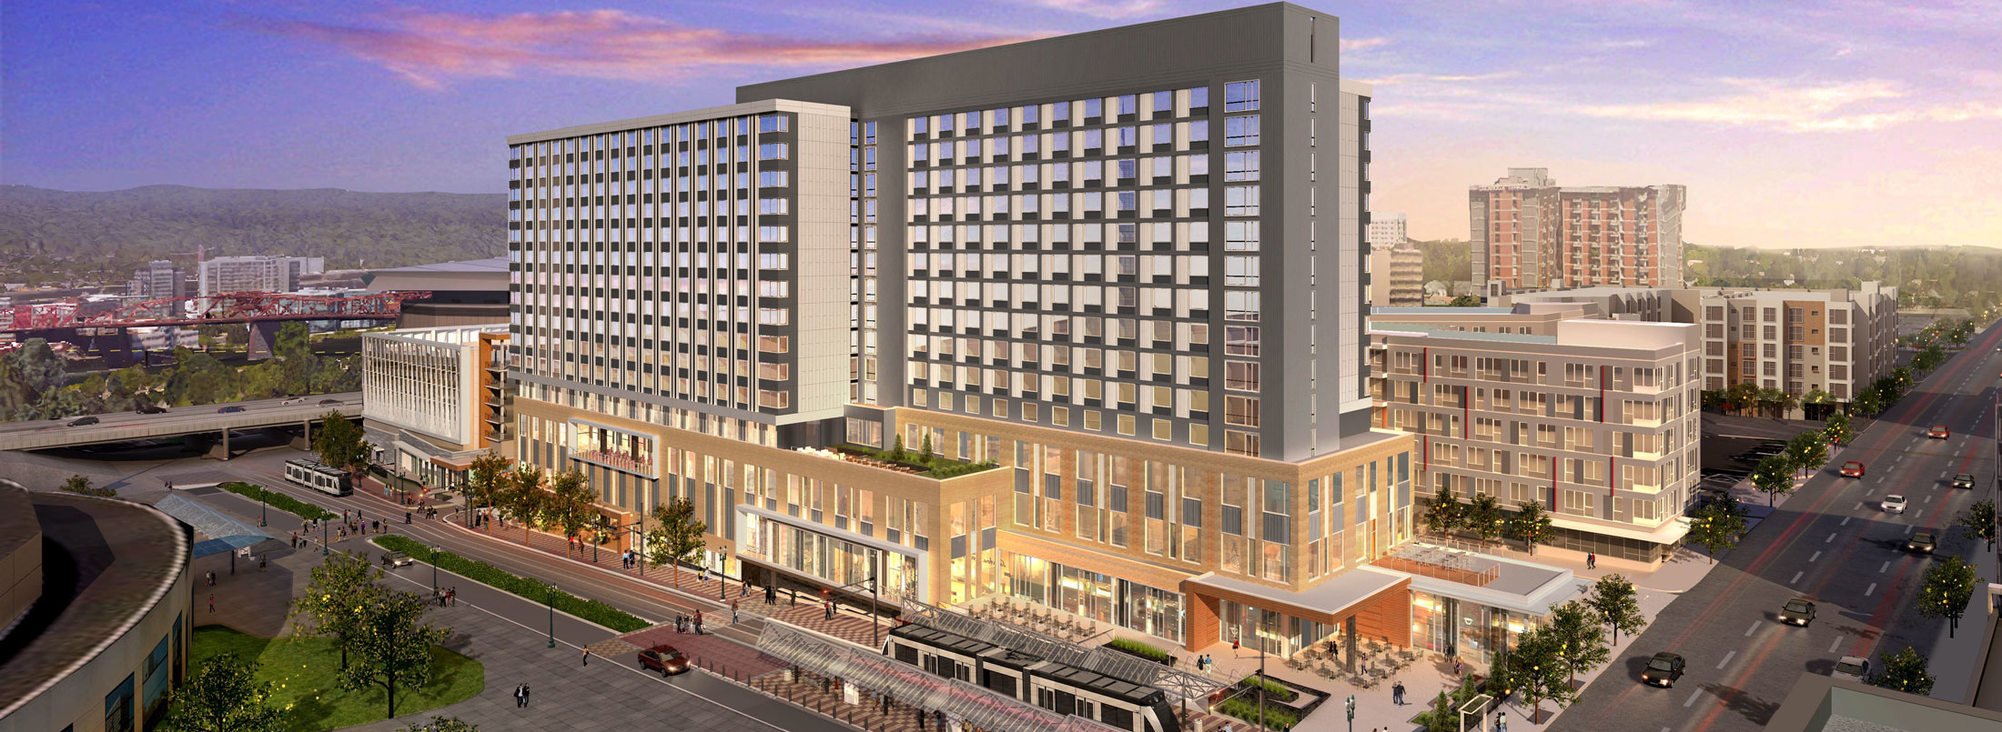 rendering of convention center hotel